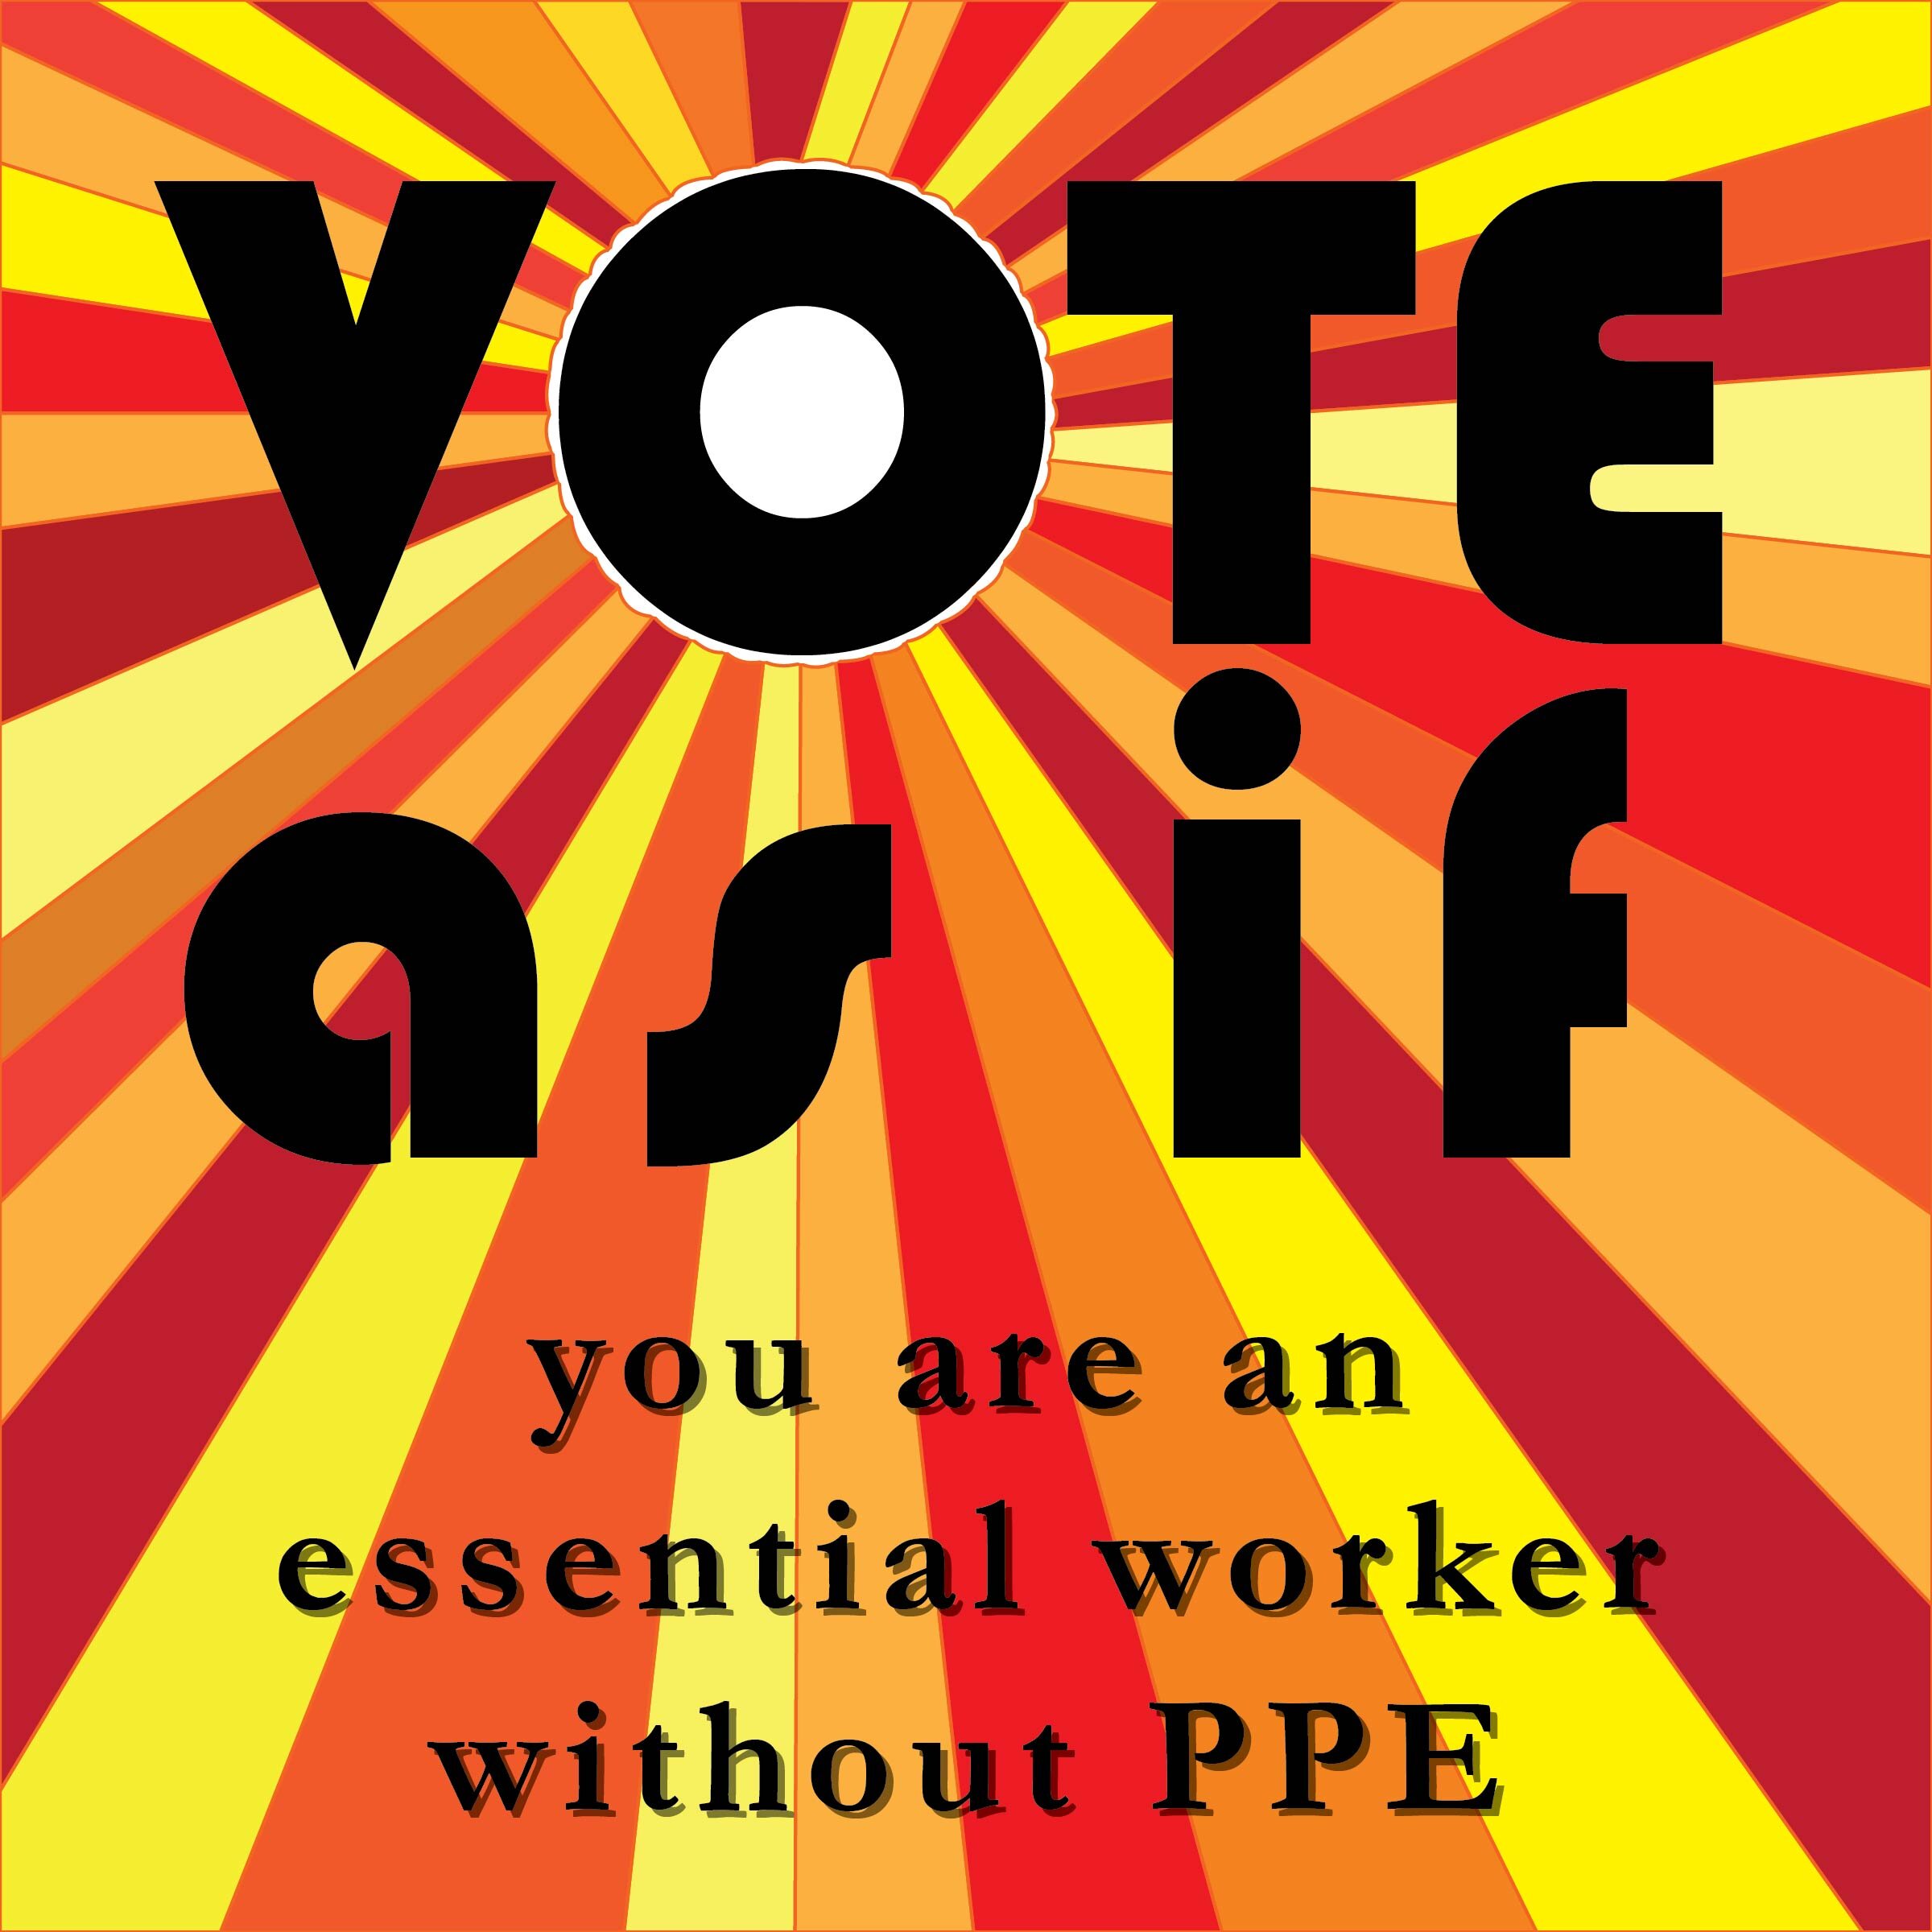 VOTEasif_youareanessentialworkerwithoutPPE-01.jpg